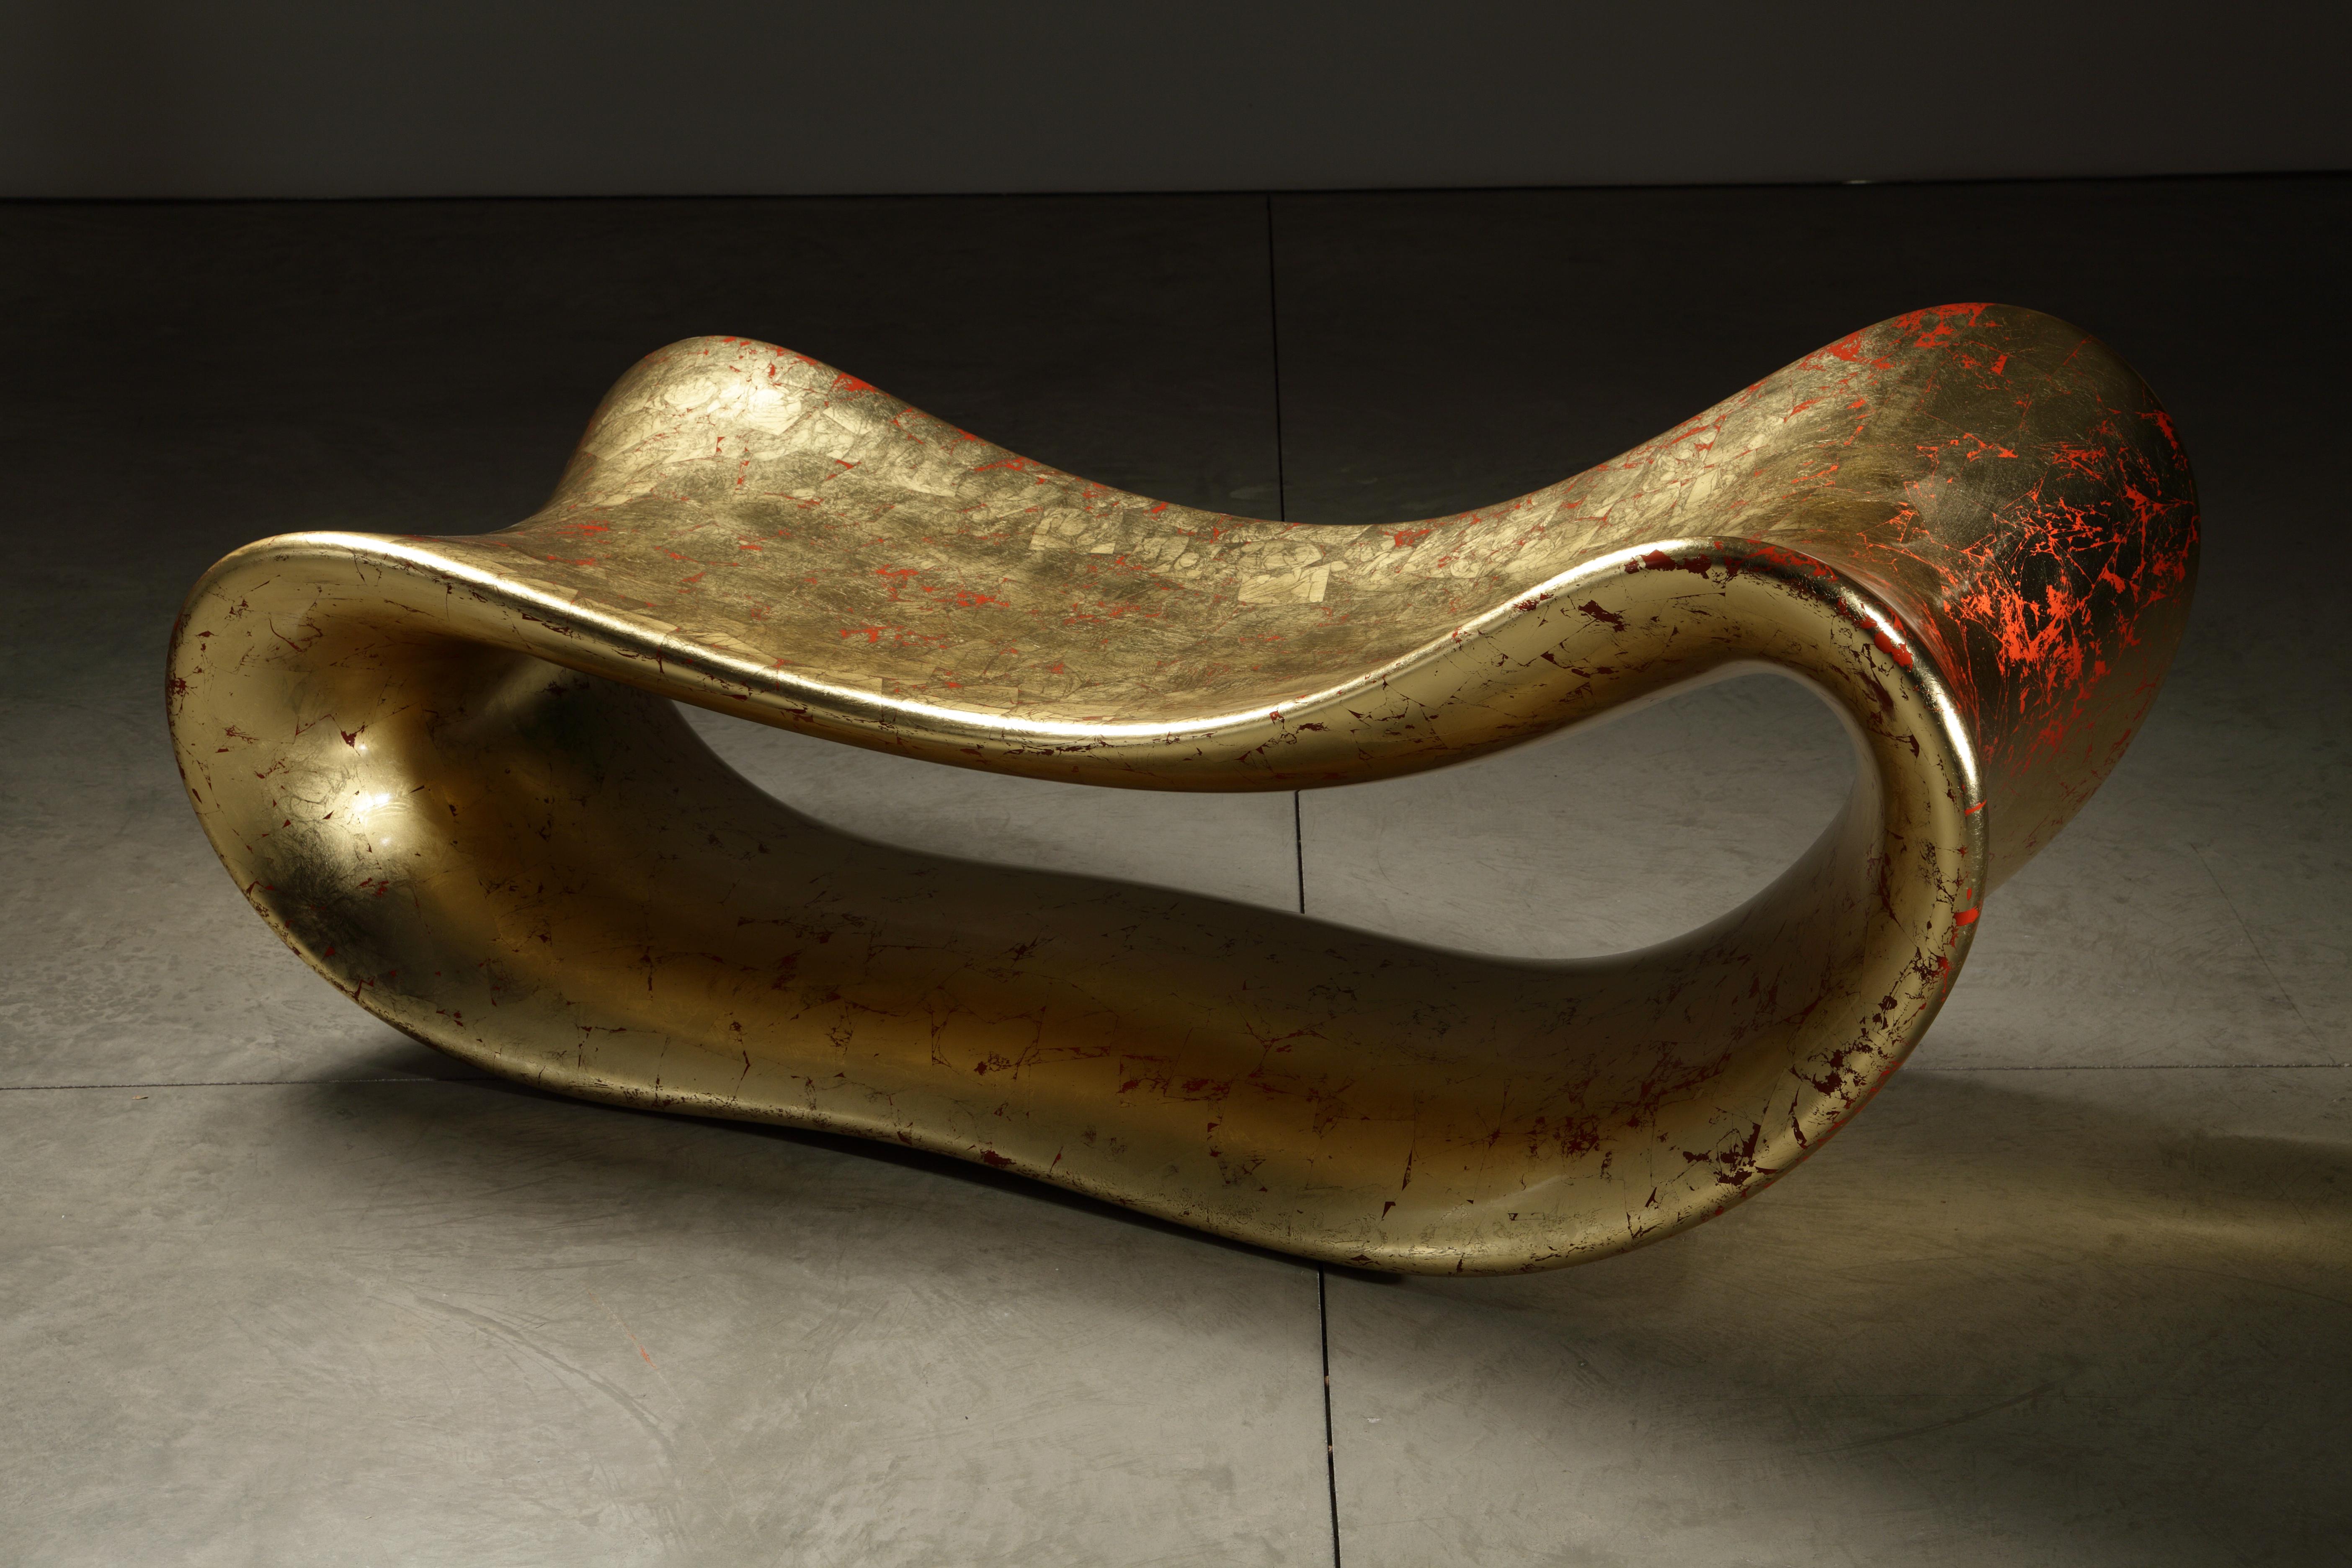 Wendell Castle [American, 1932-2018]
Calamari bench, 2010
Fiberglass with gilding
Measures: 23.5 x 55 x 22.5 inches
59.7 x 139.7 x 57.2 cm

Born in Kansas, Wendell Castle (1932-2018) received a B.F.A. from the University of Kansas in